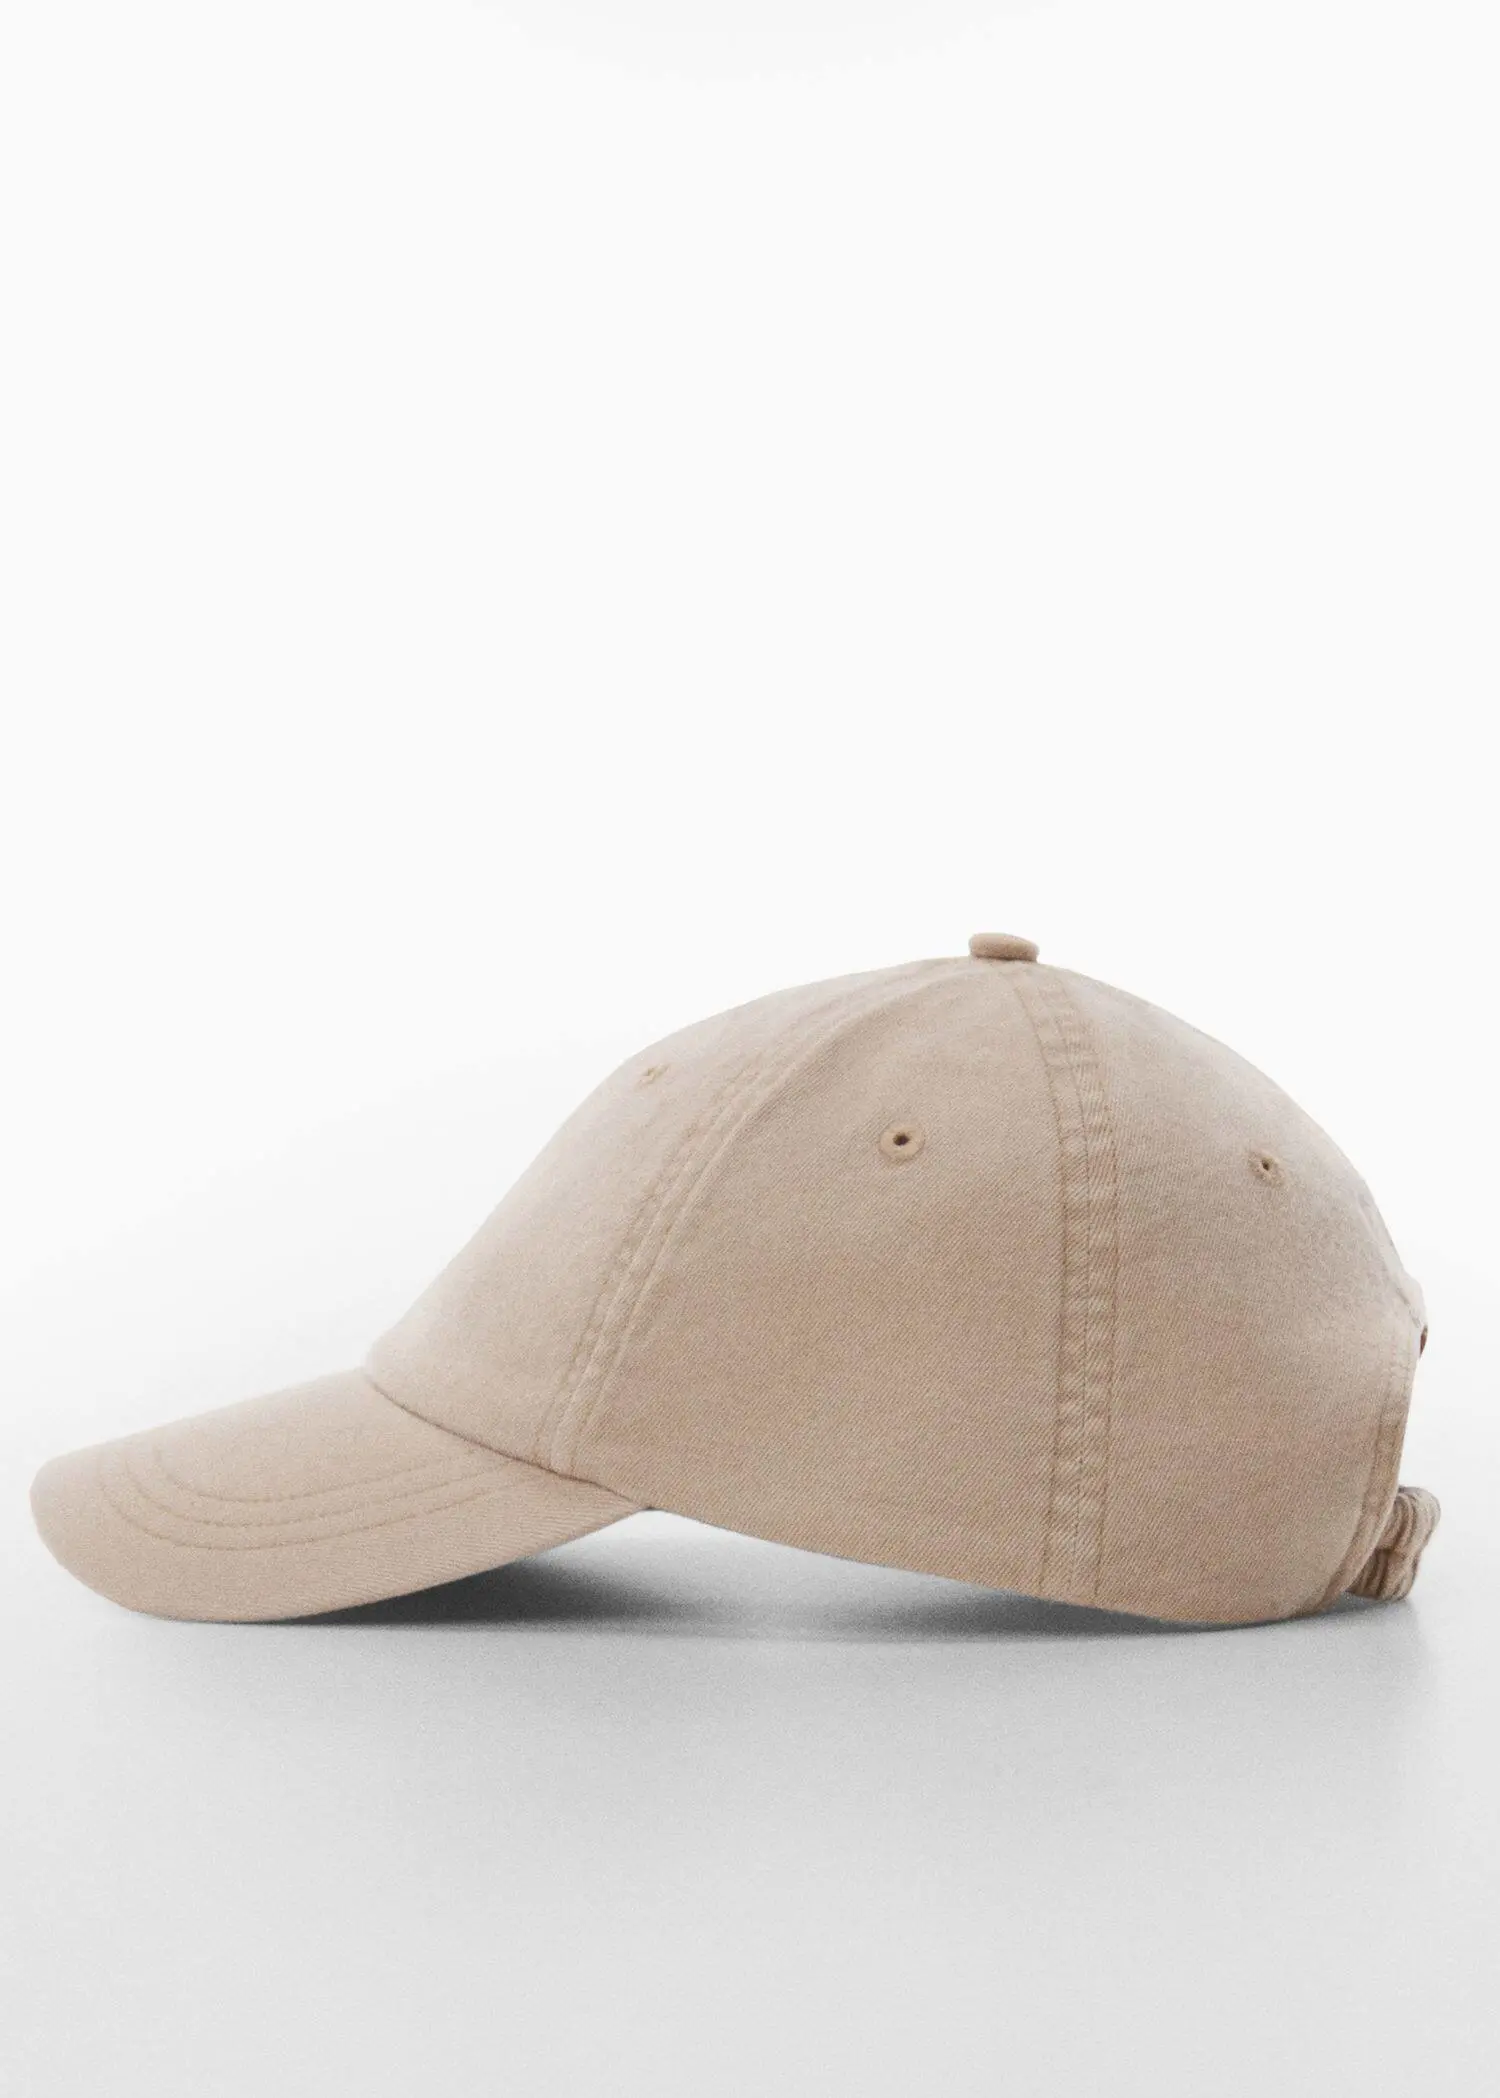 Mango Organic cotton cap. a beige hat is on a white surface. 